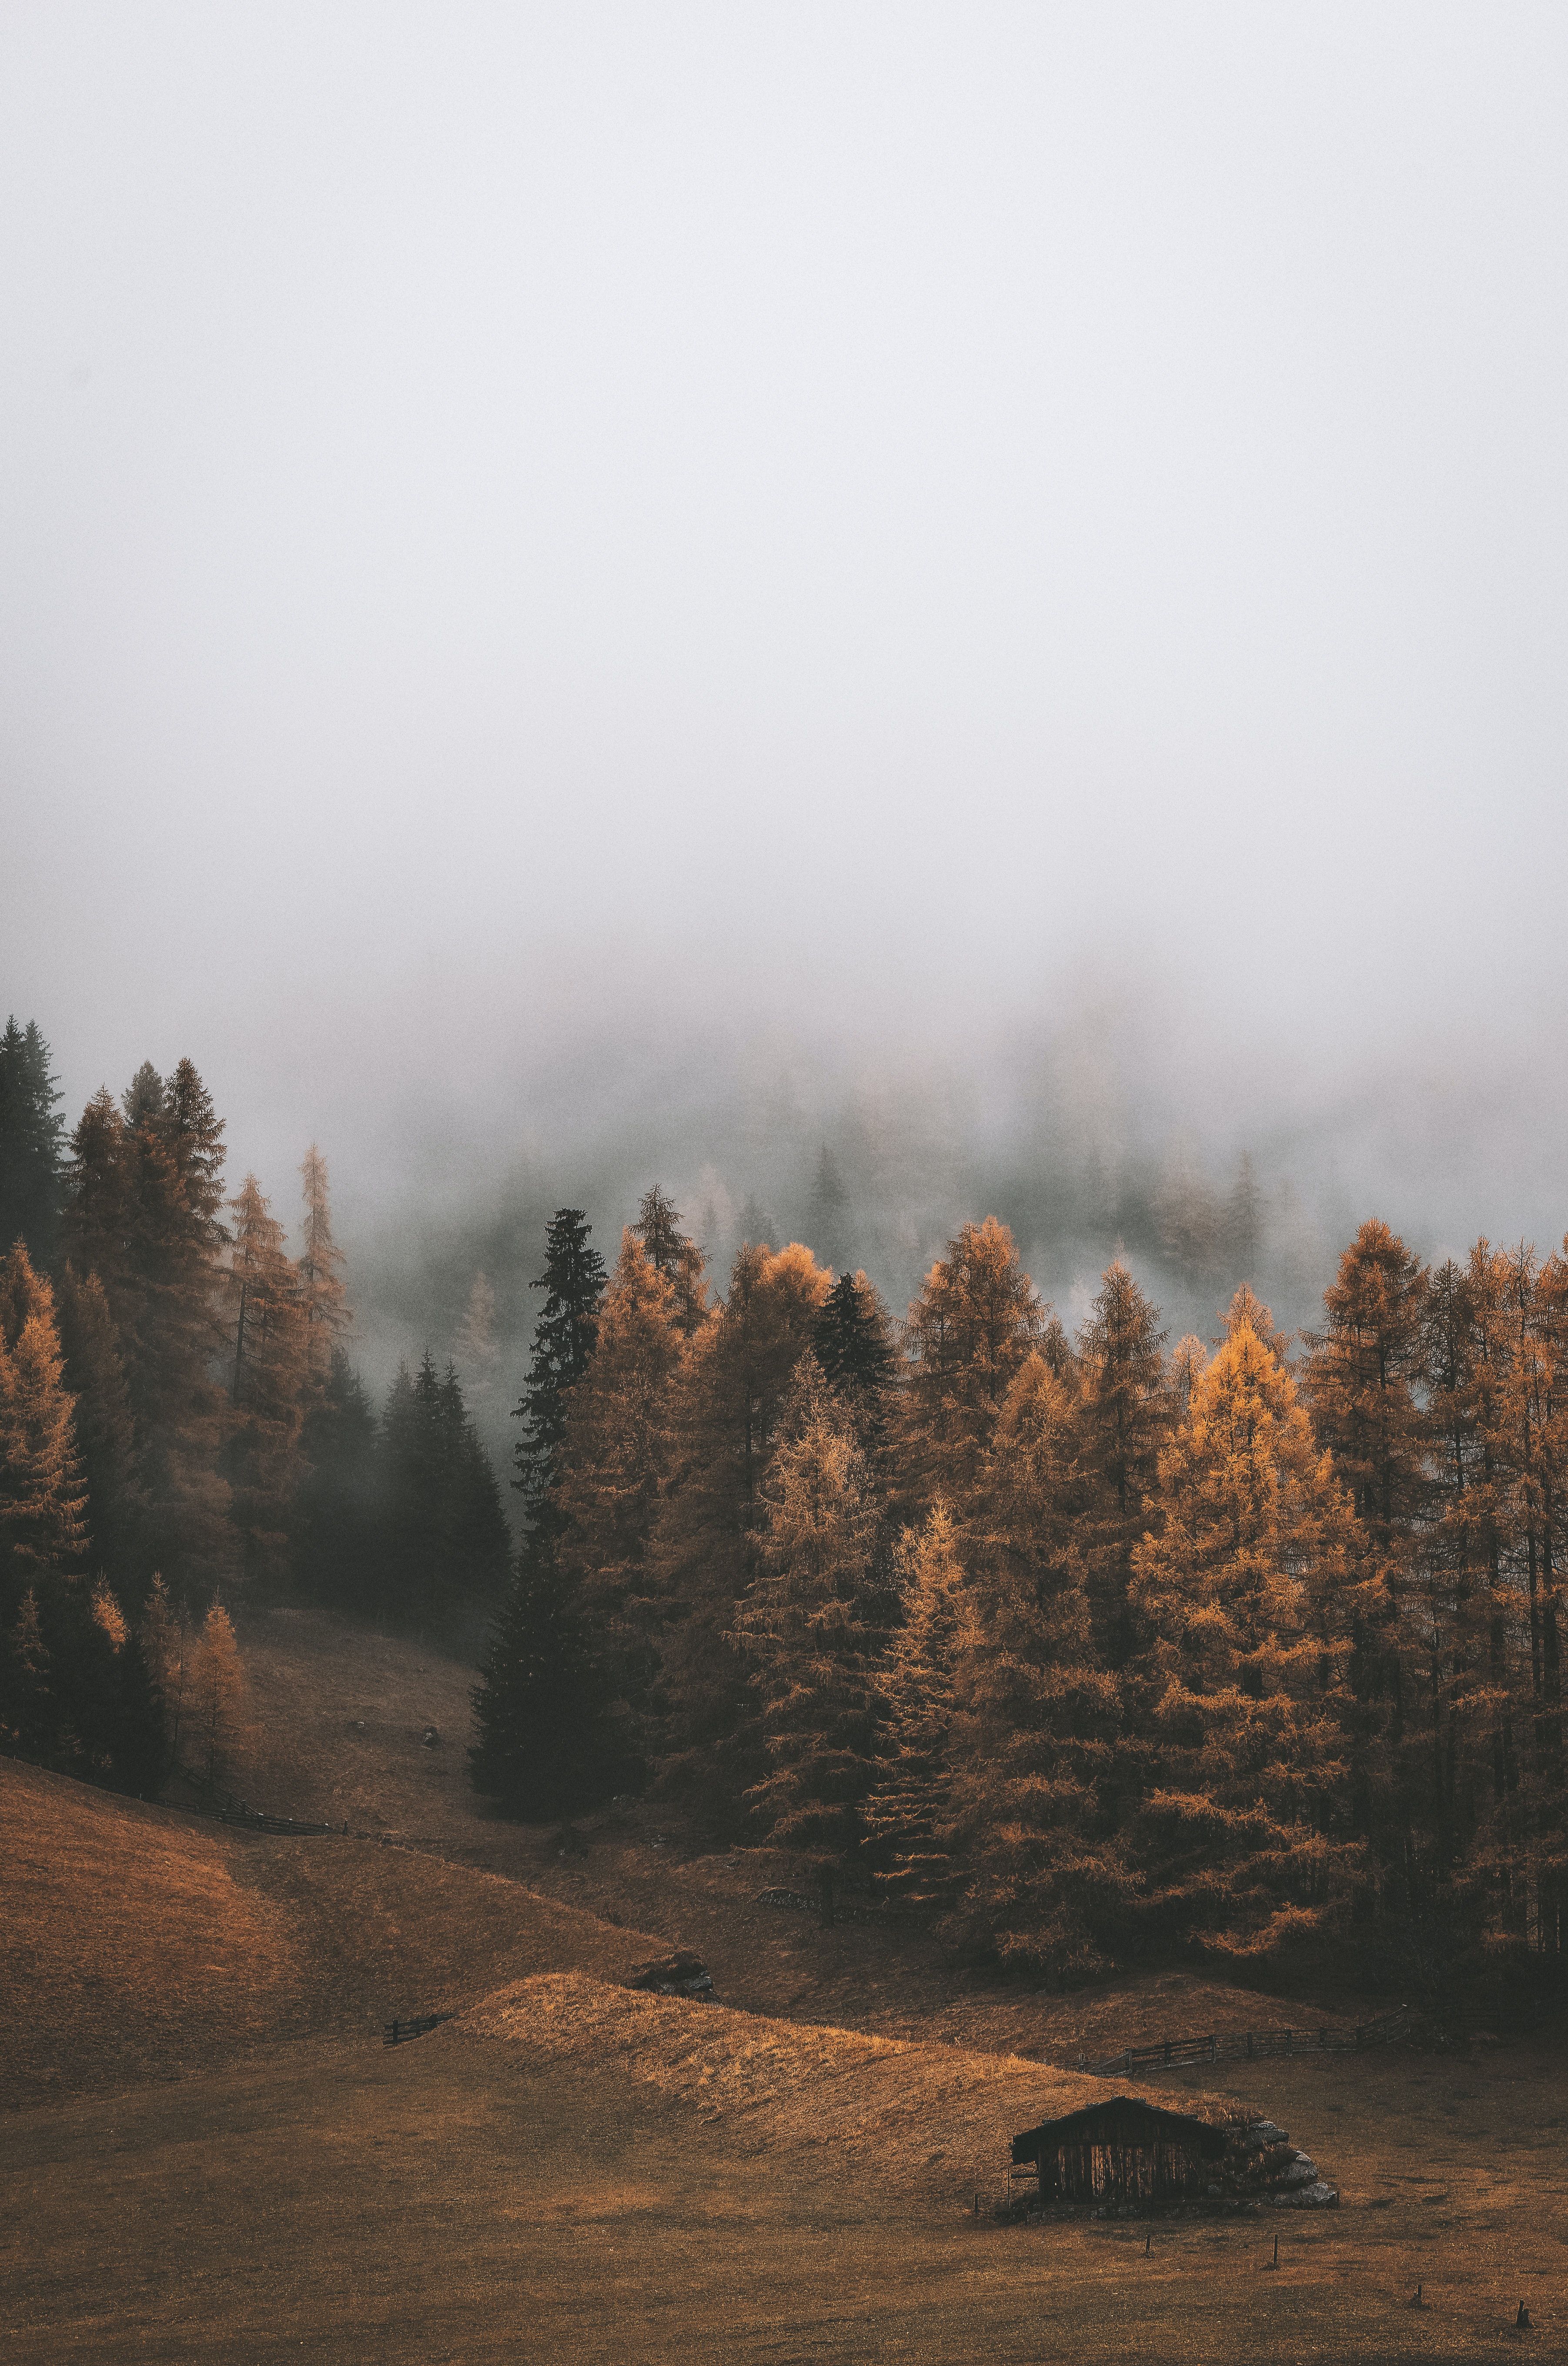 A foggy day in the mountains - Landscape, forest, foggy forest